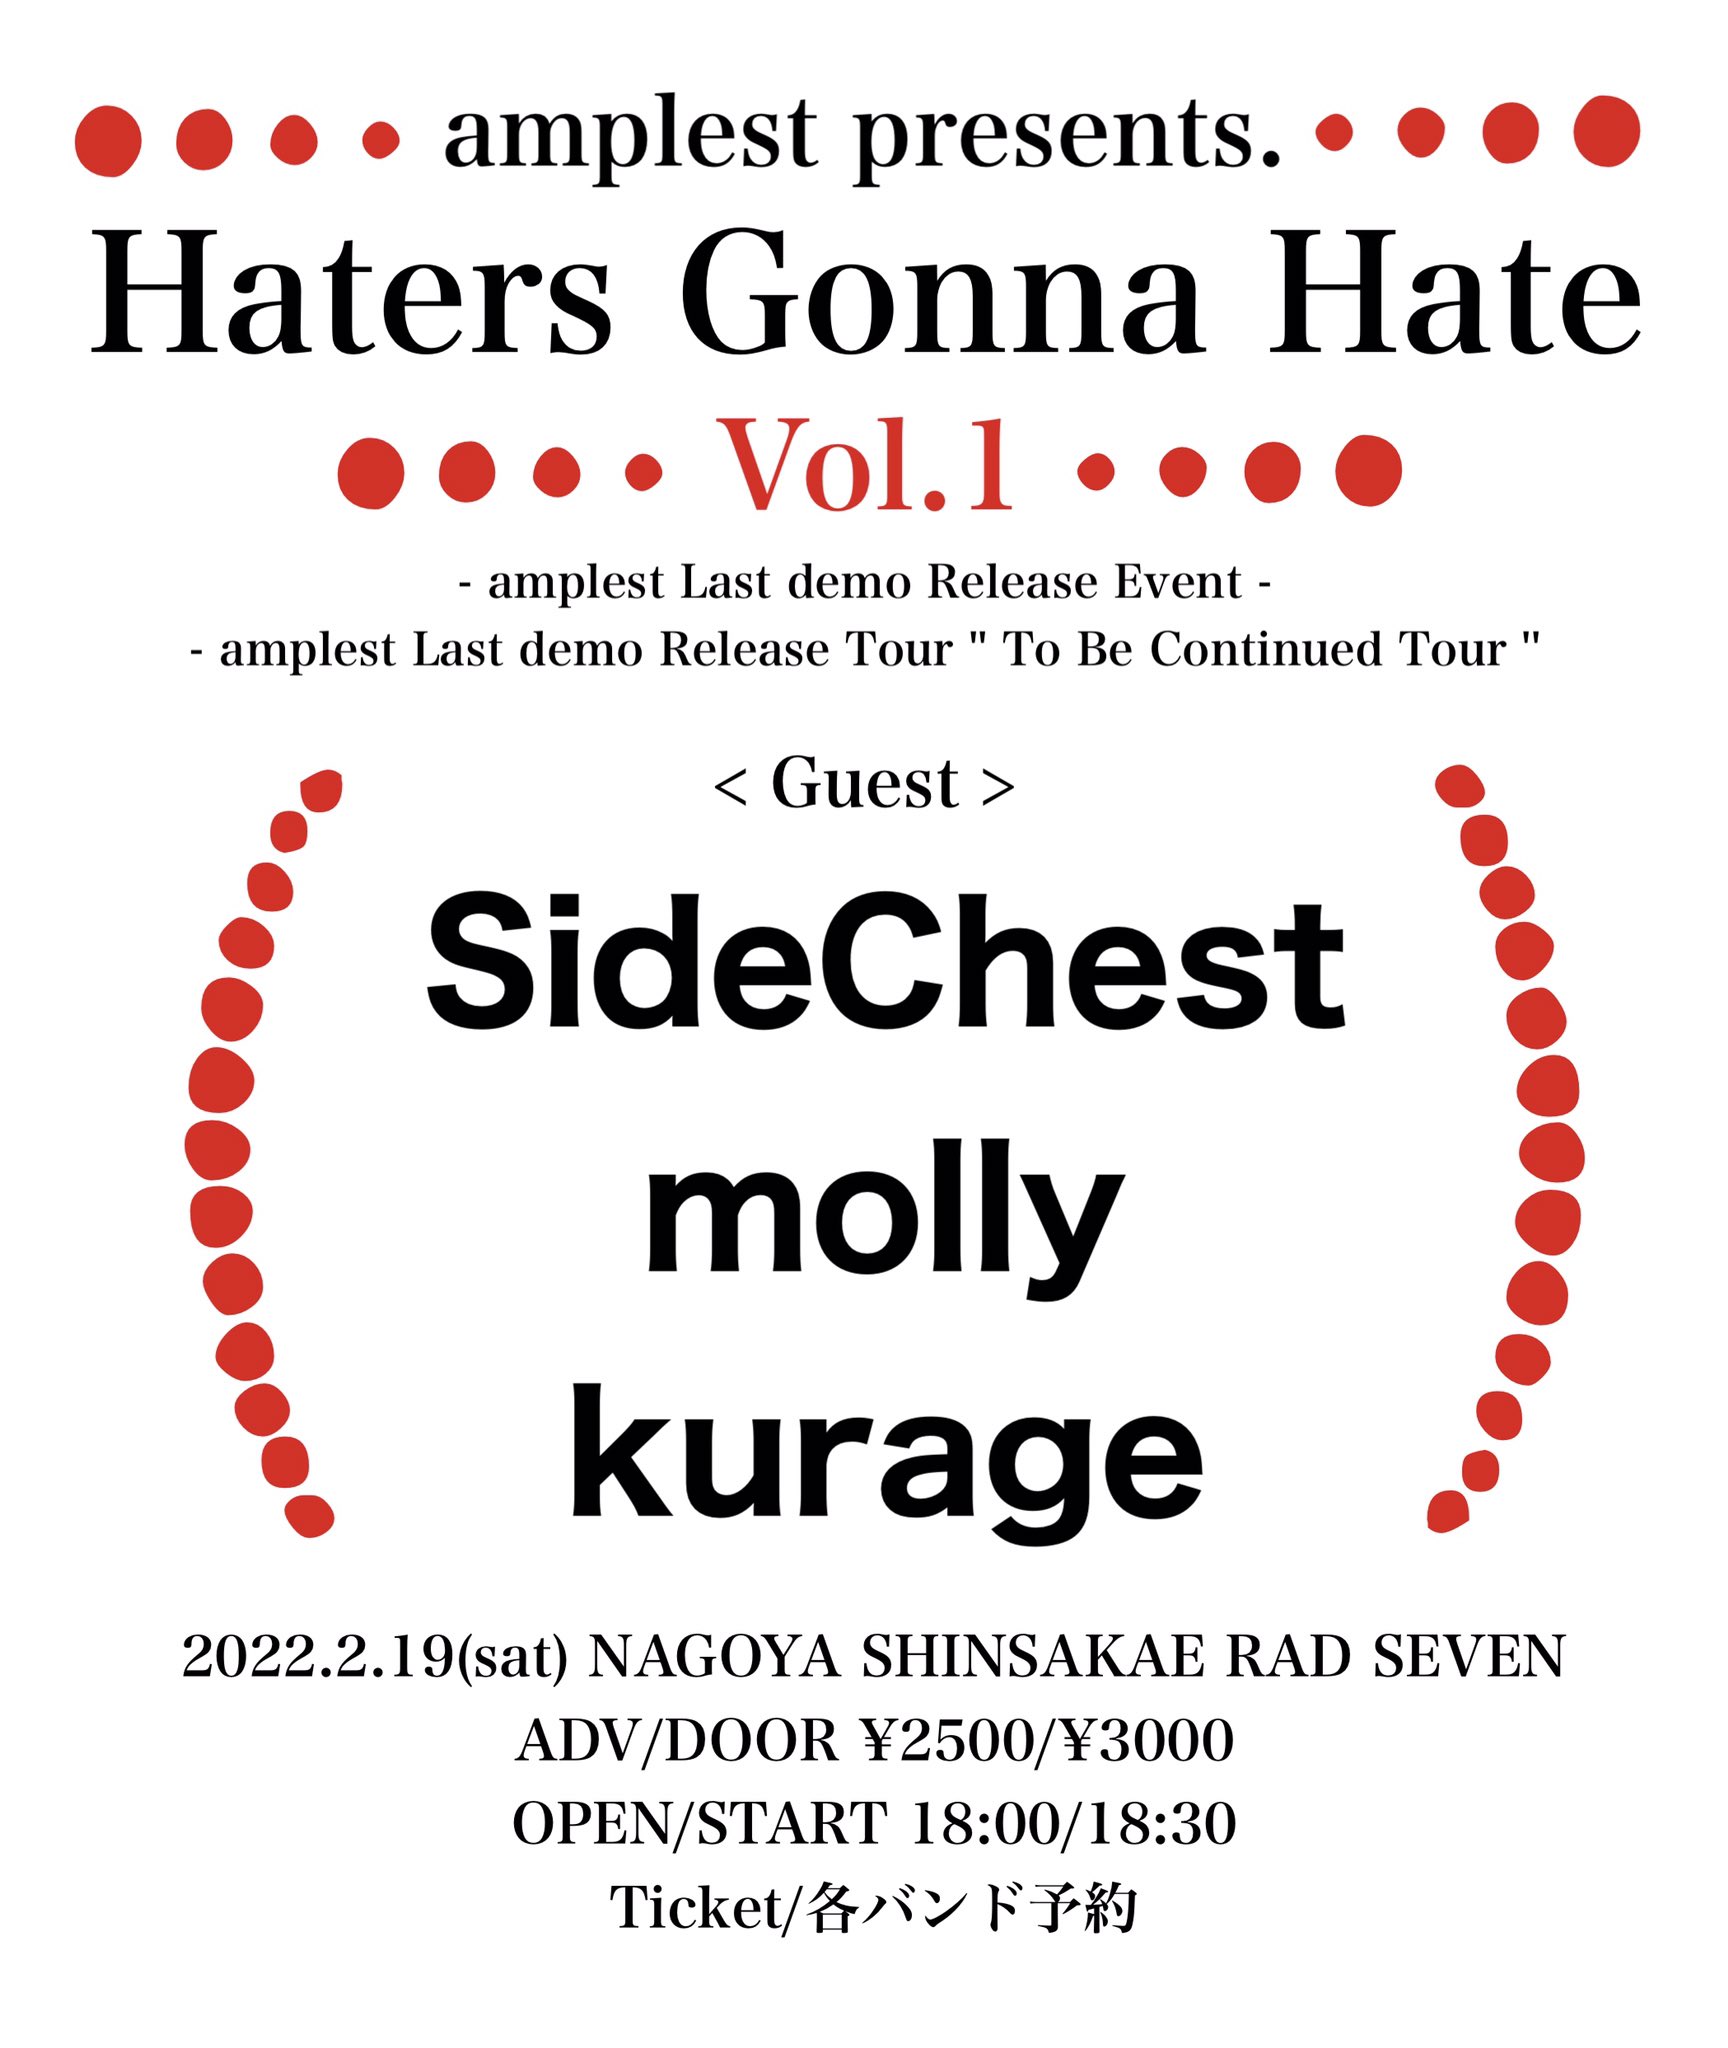 amplest presents. '' Haters Gonna Hate Vol.1 '' -amplest Last demo Release Event- -amplest Last demo Release Tour ''To Be Continued Tour''-